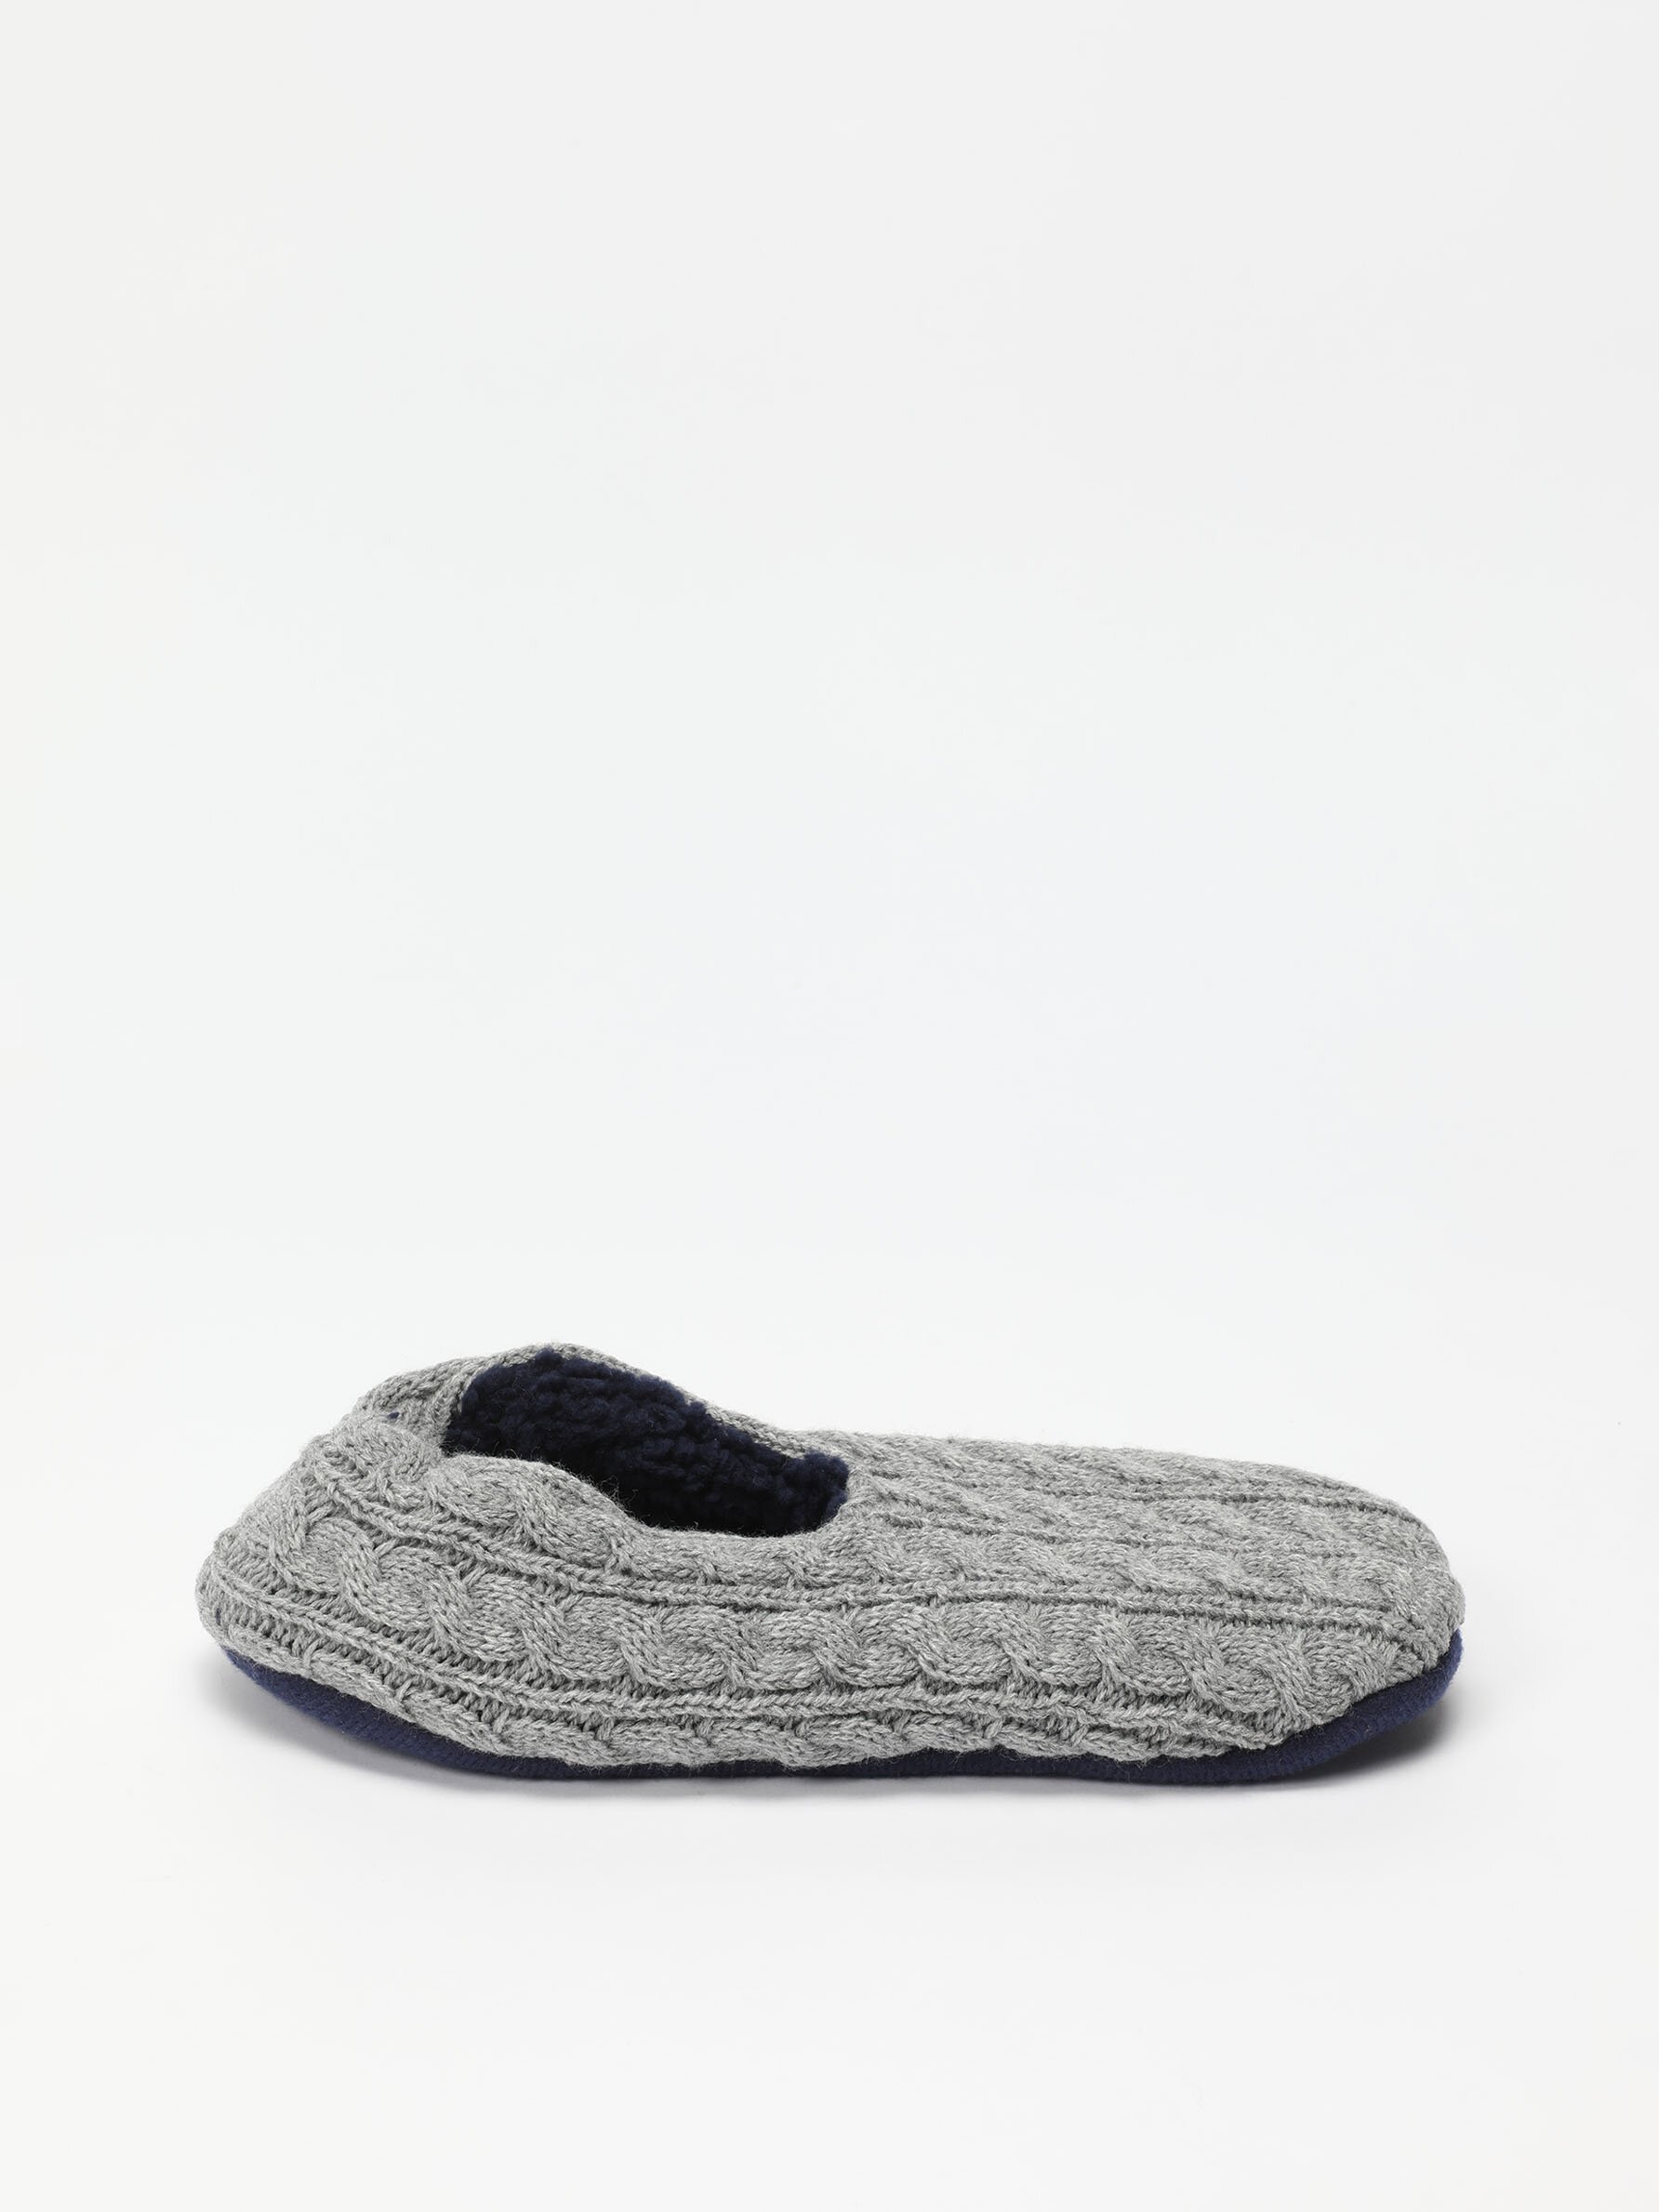 Men's Spencer Slippers with Sheepskin Lining in Navy Blue | Nuknuuk